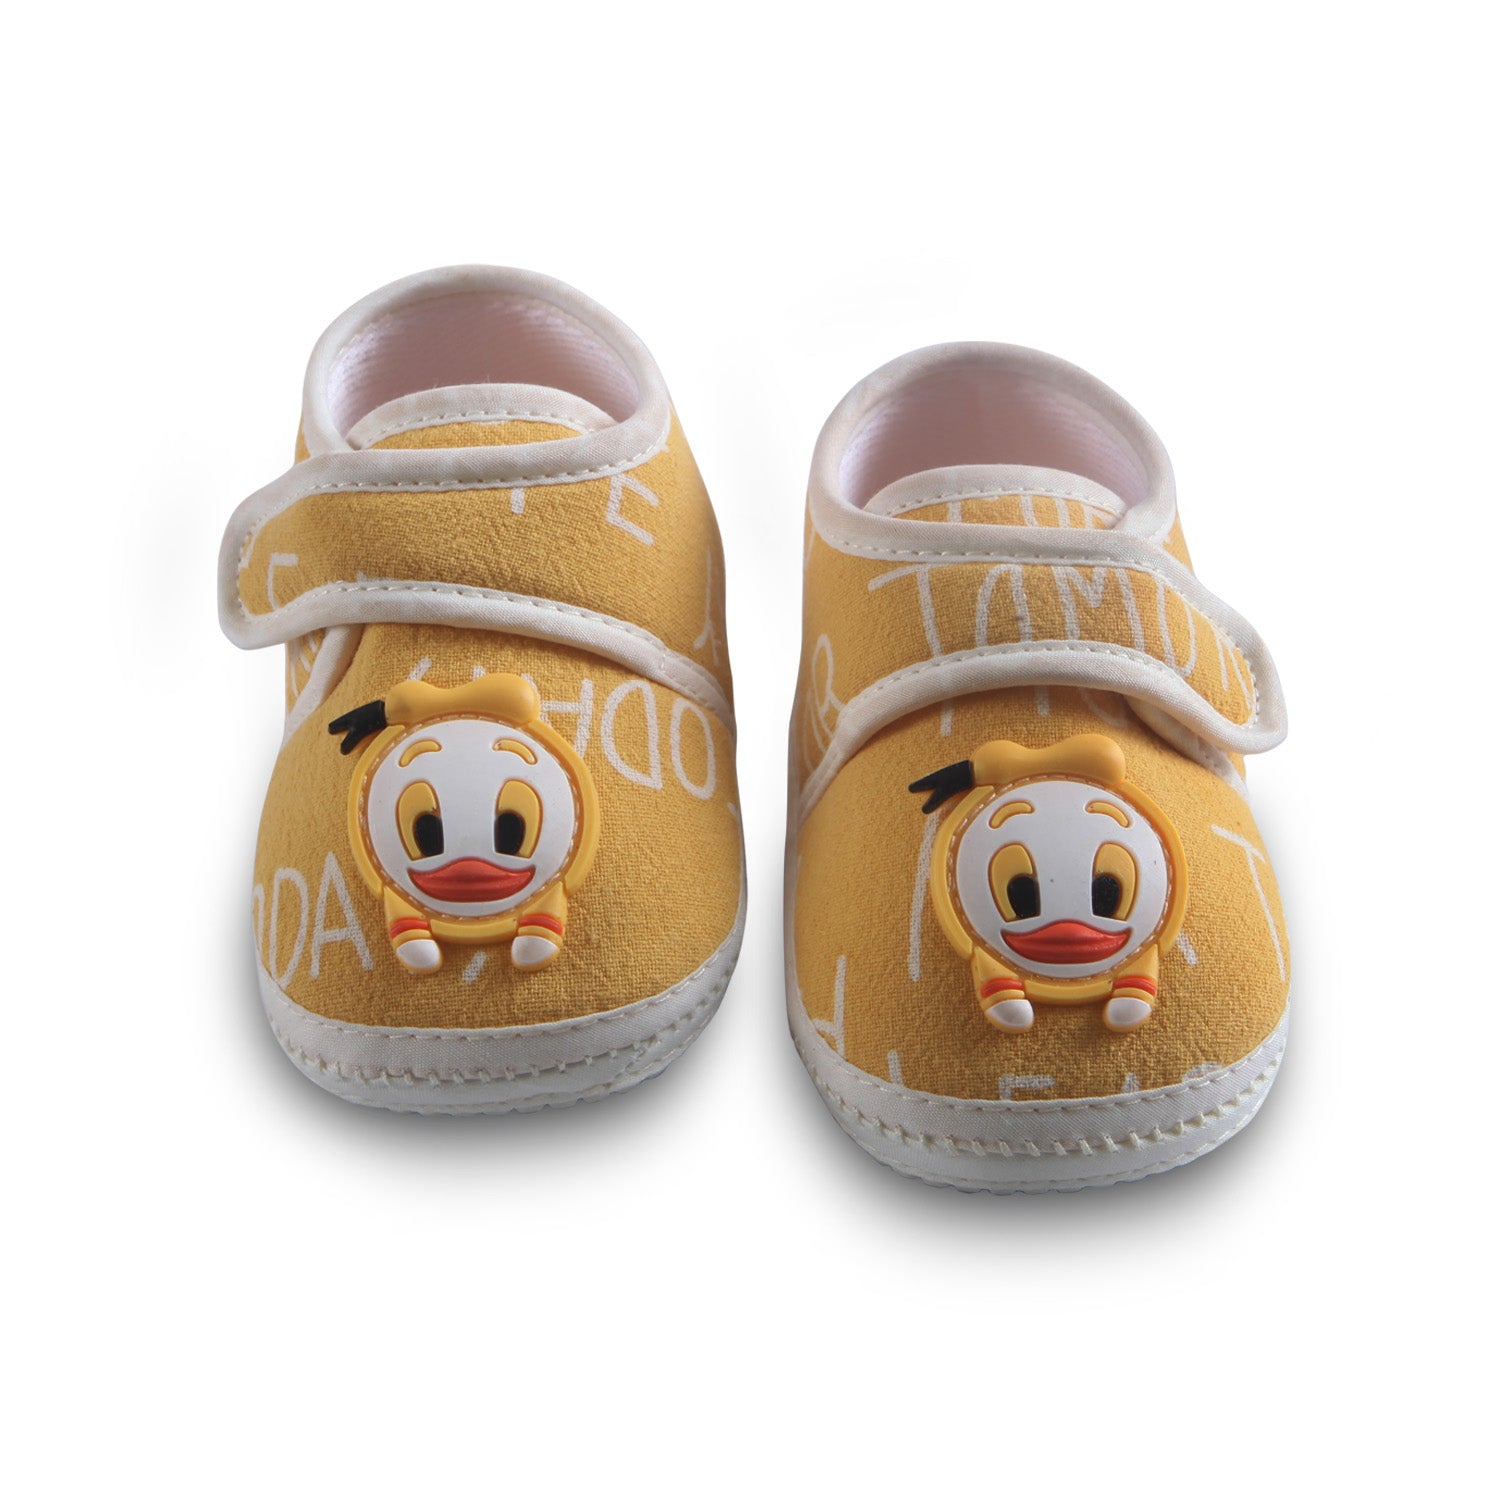 Non-slip Booties with Strap Kids Shoes Duck - Yellow - Baby Moo